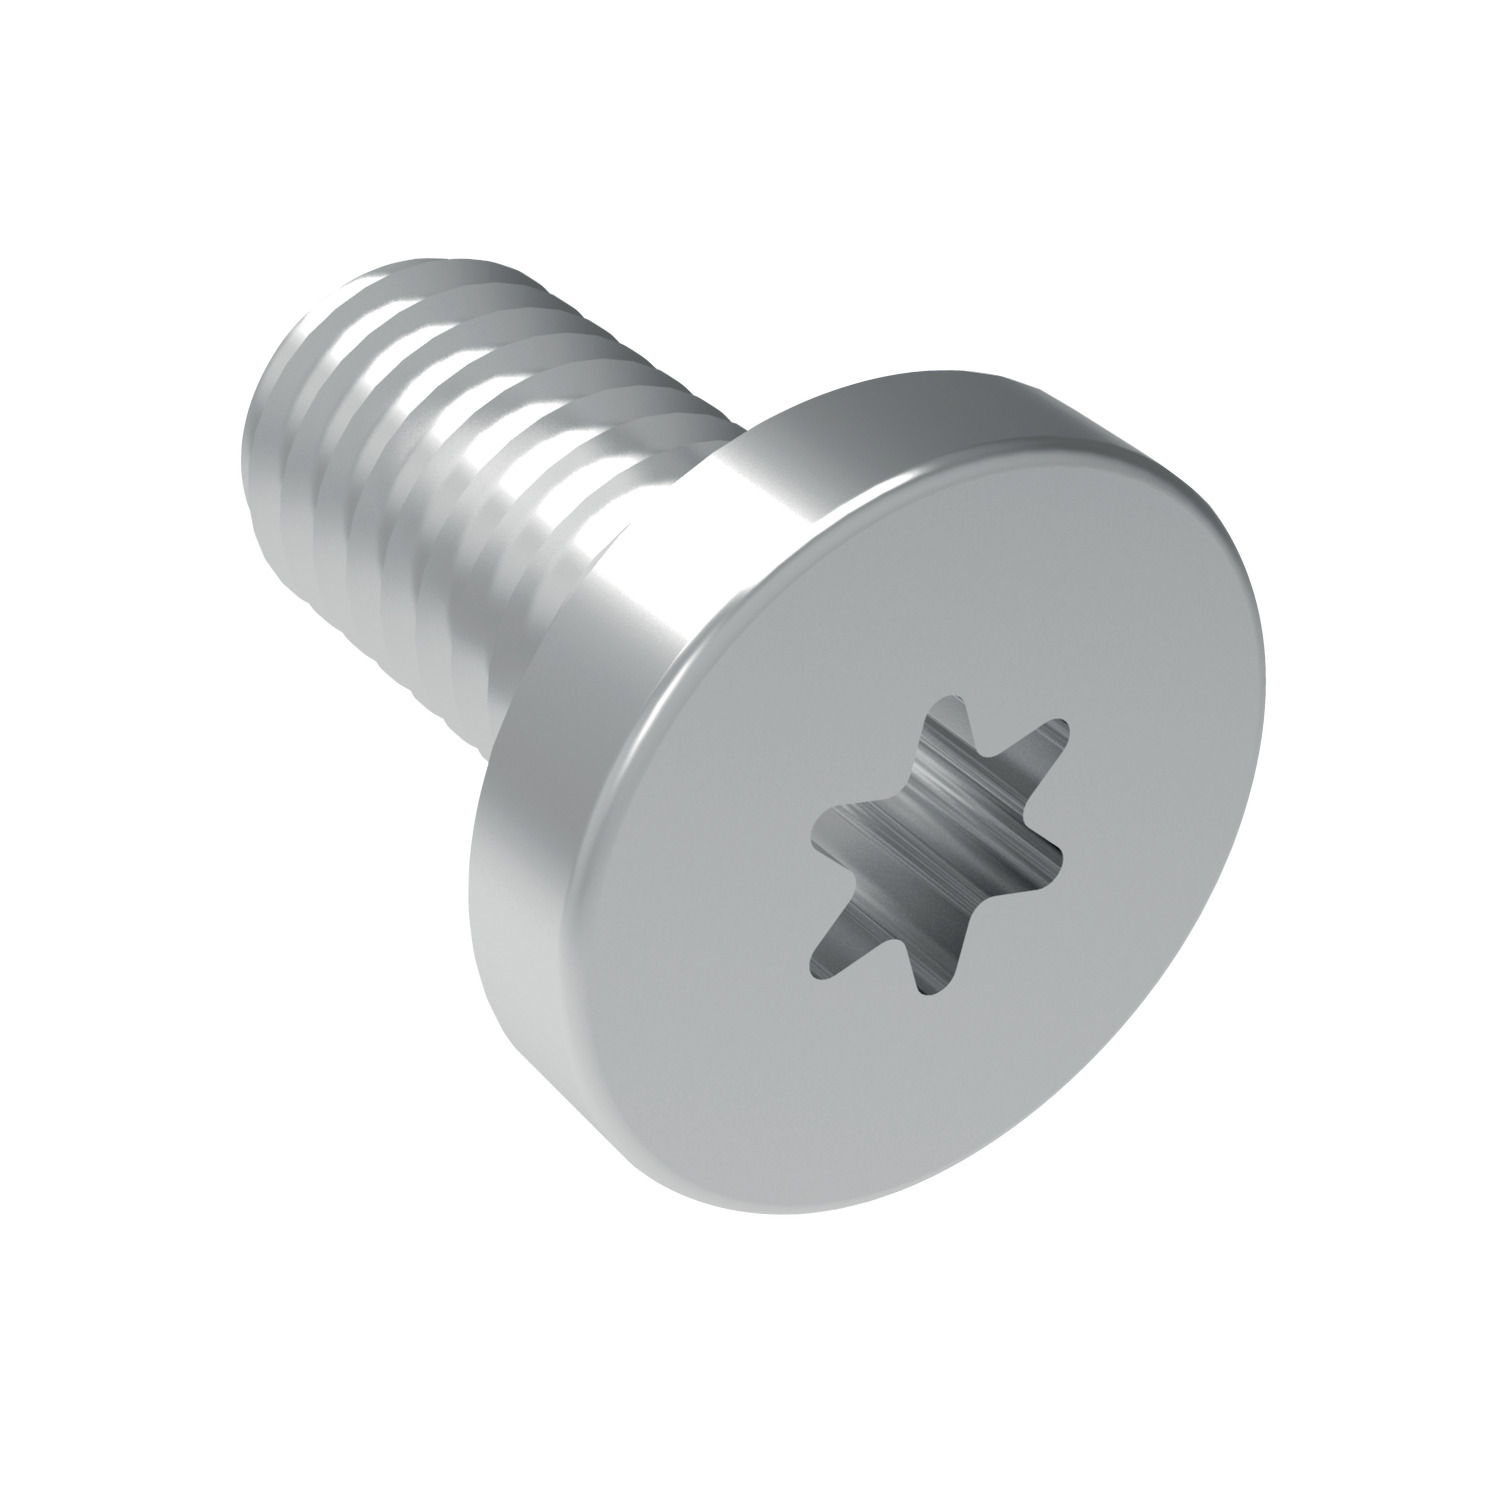 Product L1970.S, Fixing screws for steel X rail / 